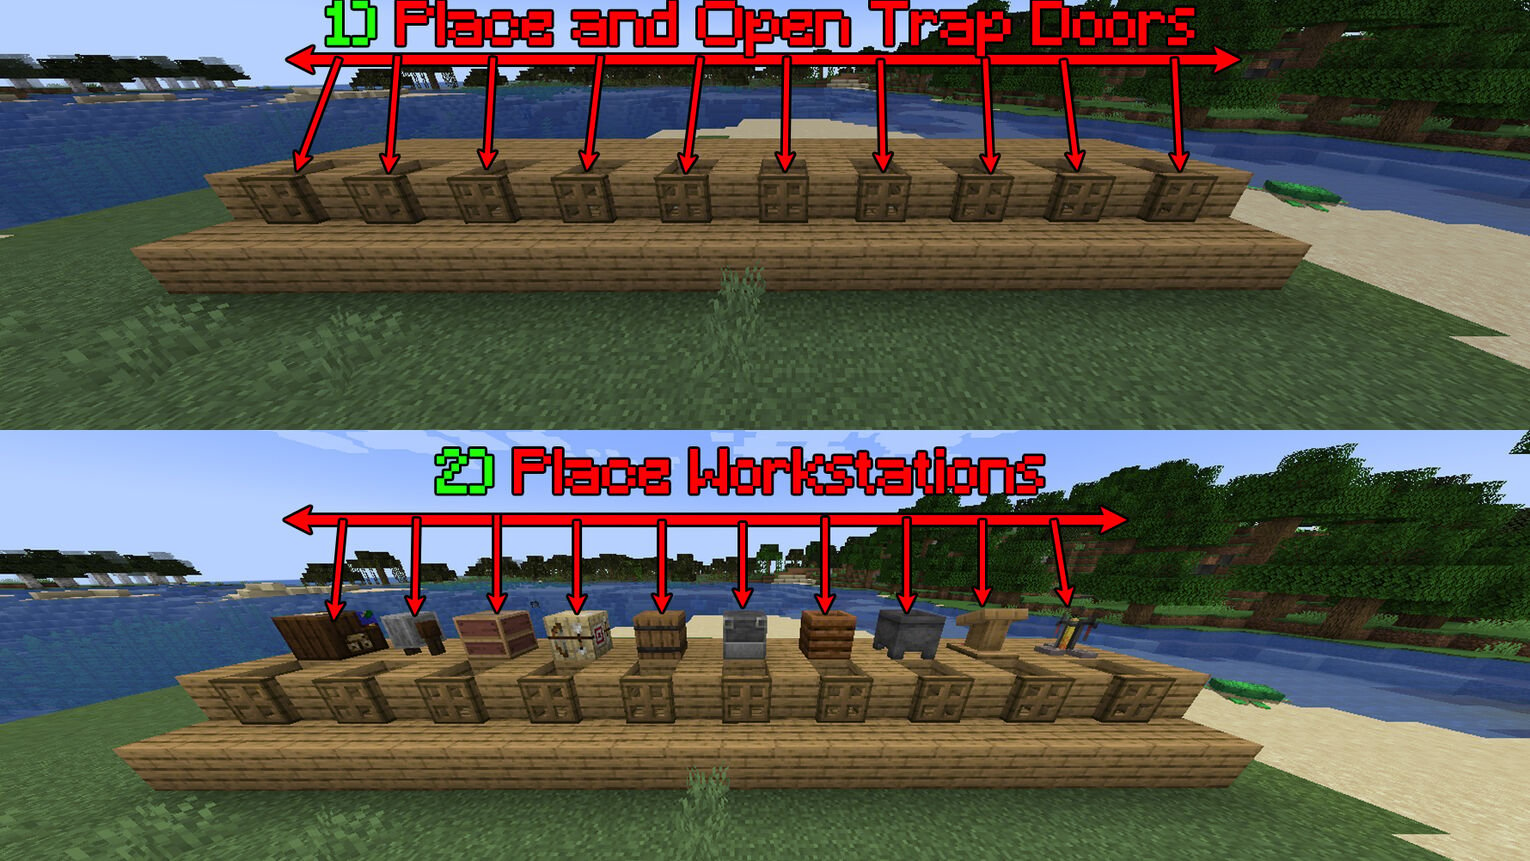 Minecraft Villager Trading Hall Trap Door and Workstation Placement